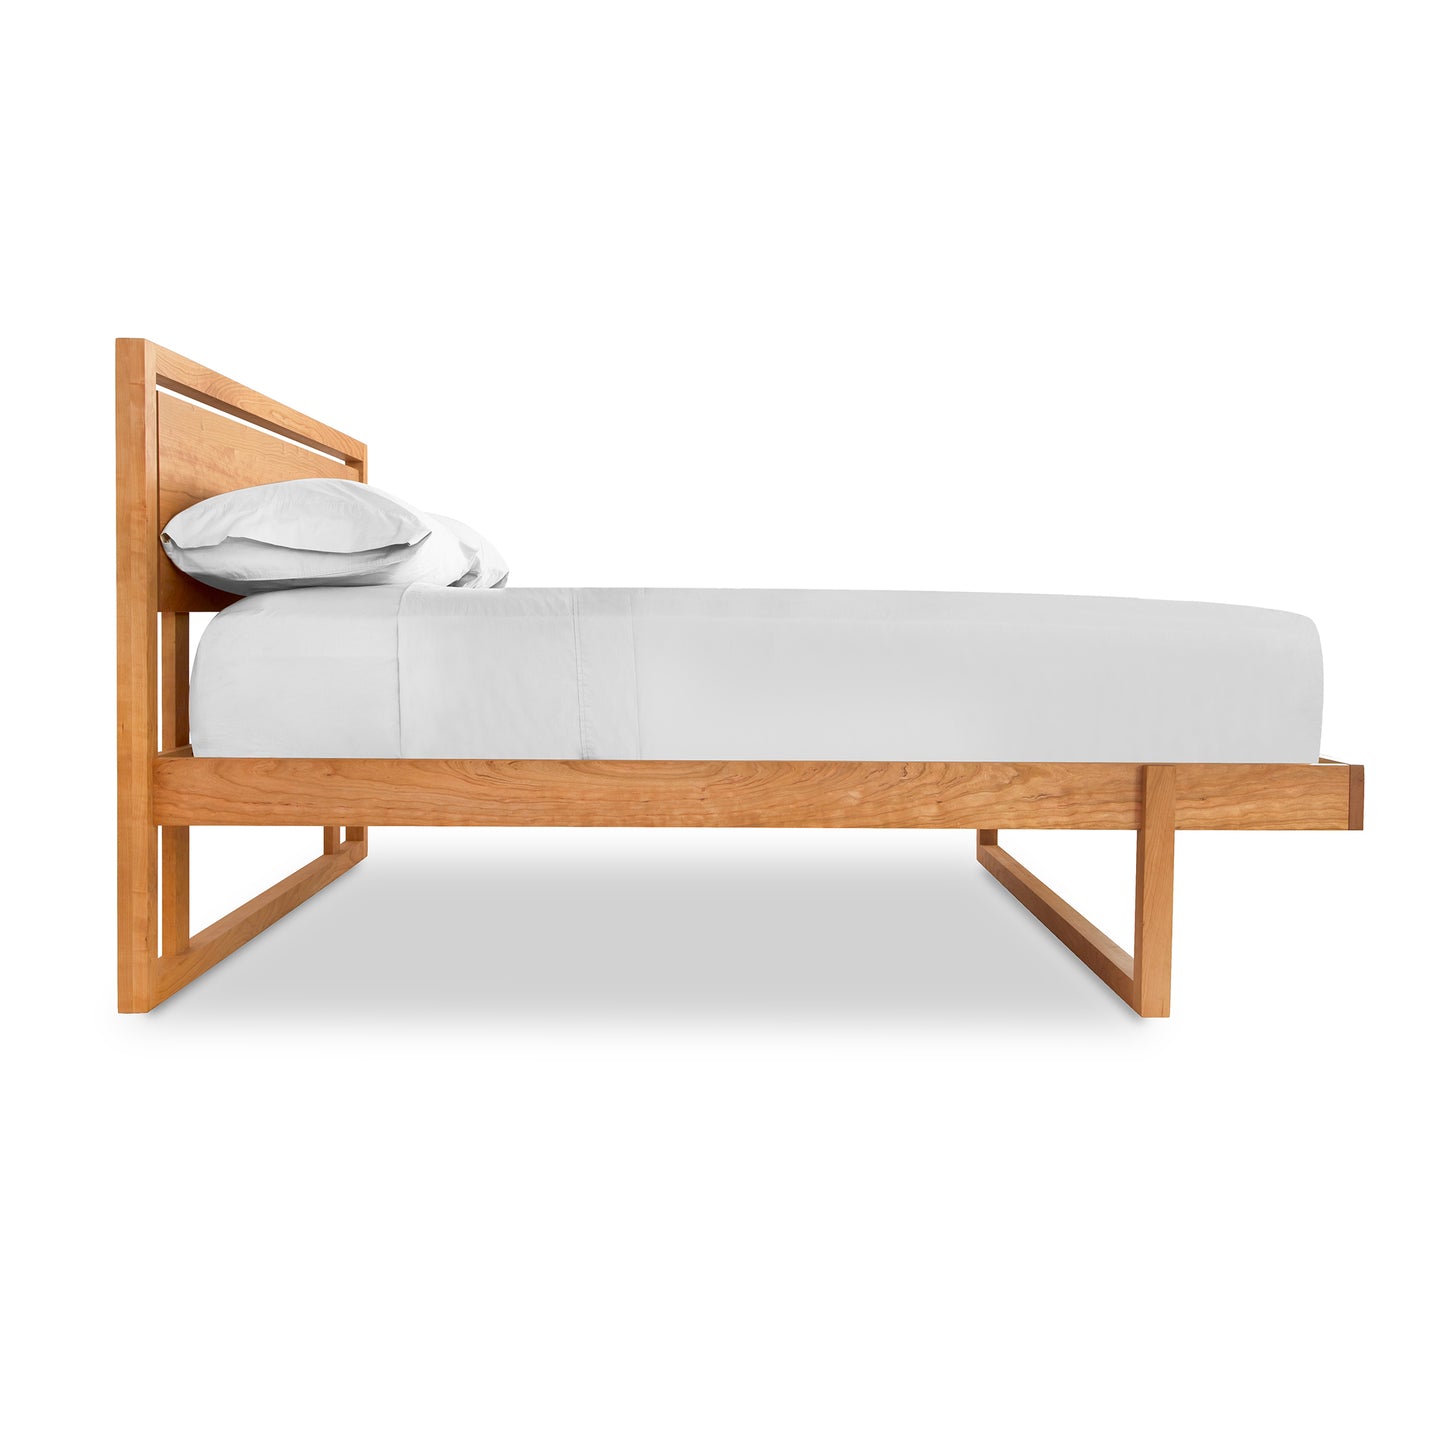 A Vermont Furniture Designs Pendant Bed with a cherry wood frame and white sheets.